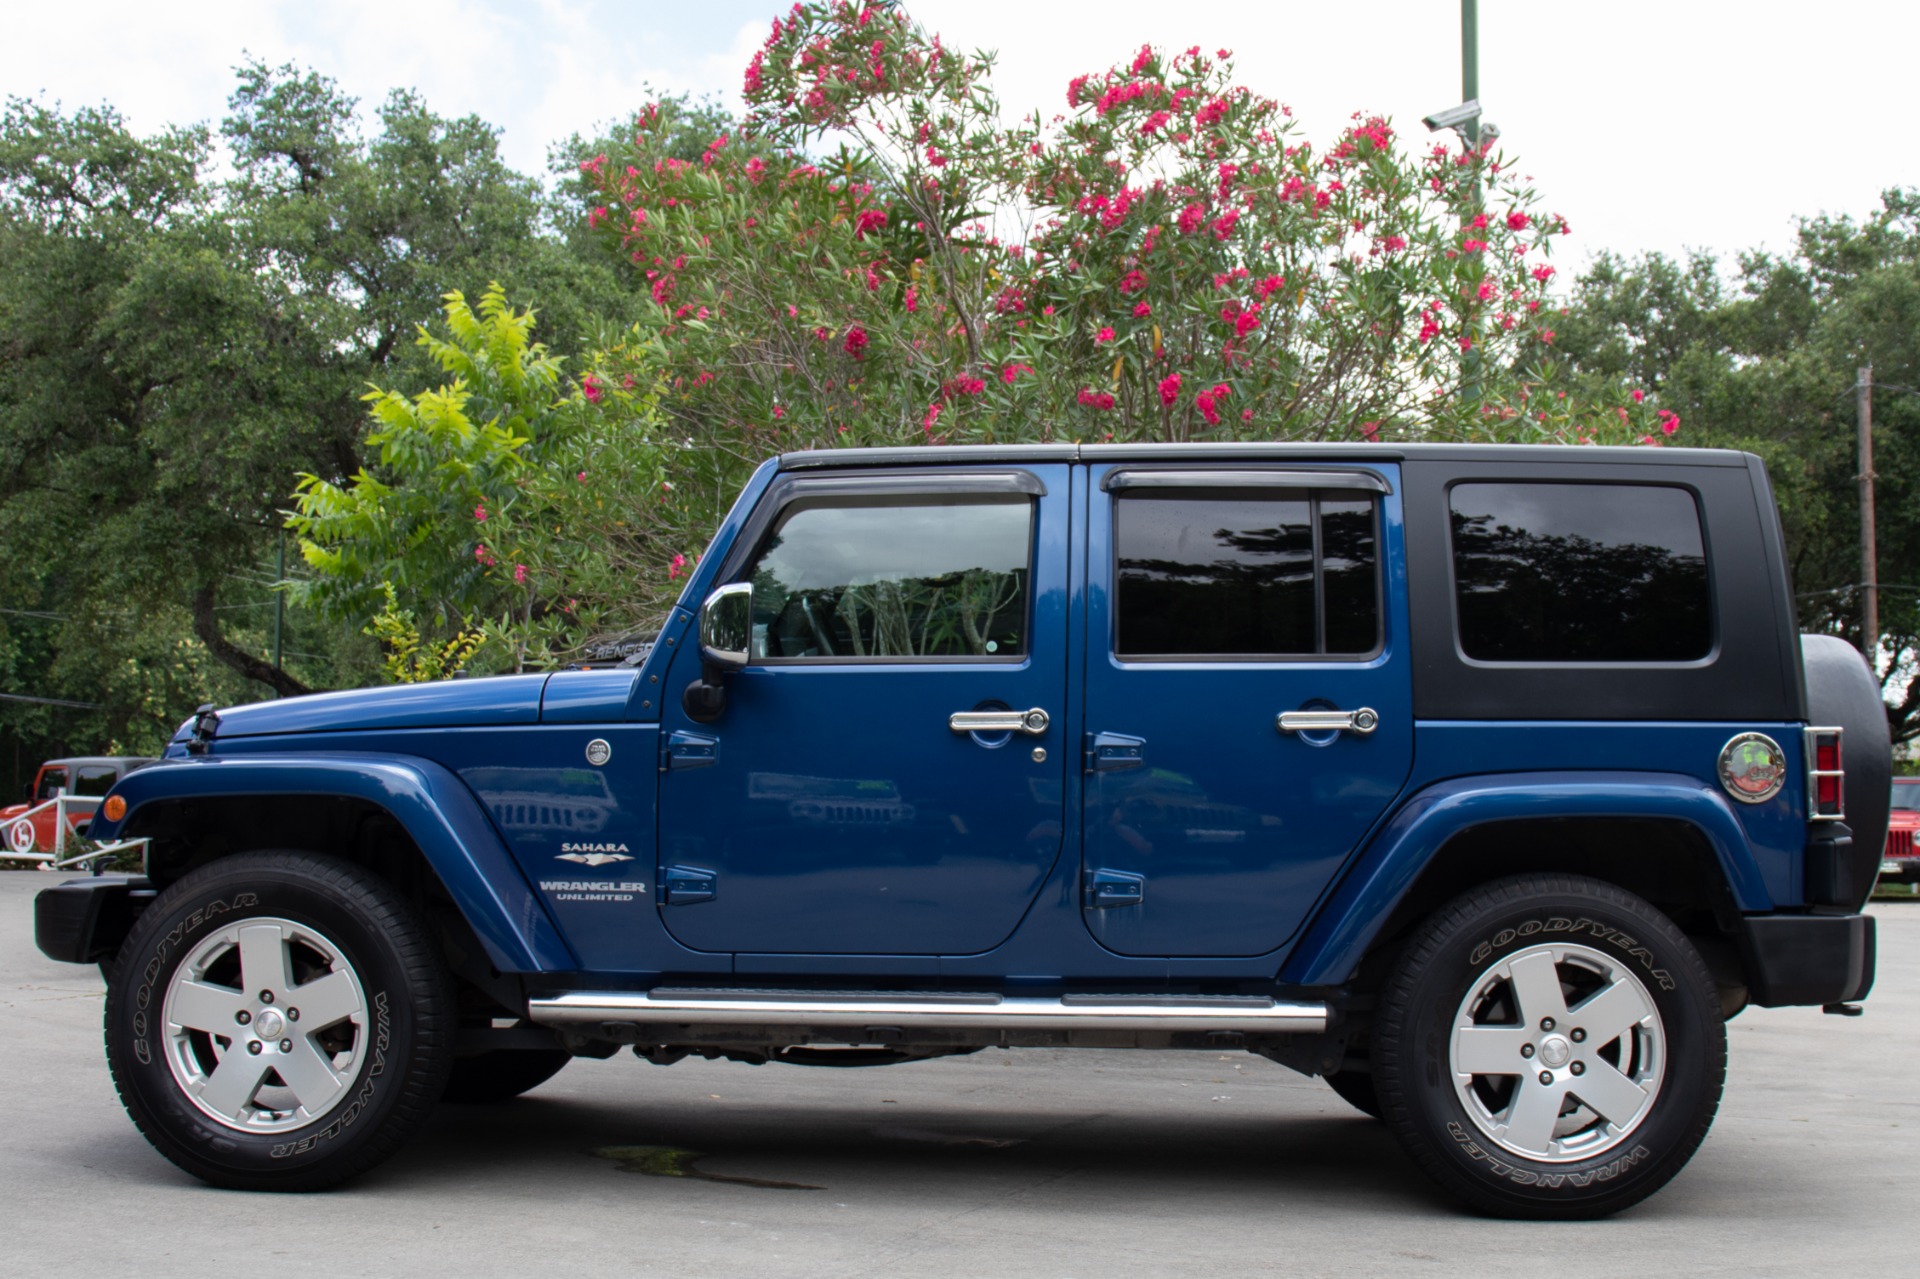 Used 2010 Jeep Wrangler Unlimited Sahara For Sale ($20,995) | Select 2010 Jeep Wrangler Unlimited Sahara Towing Capacity